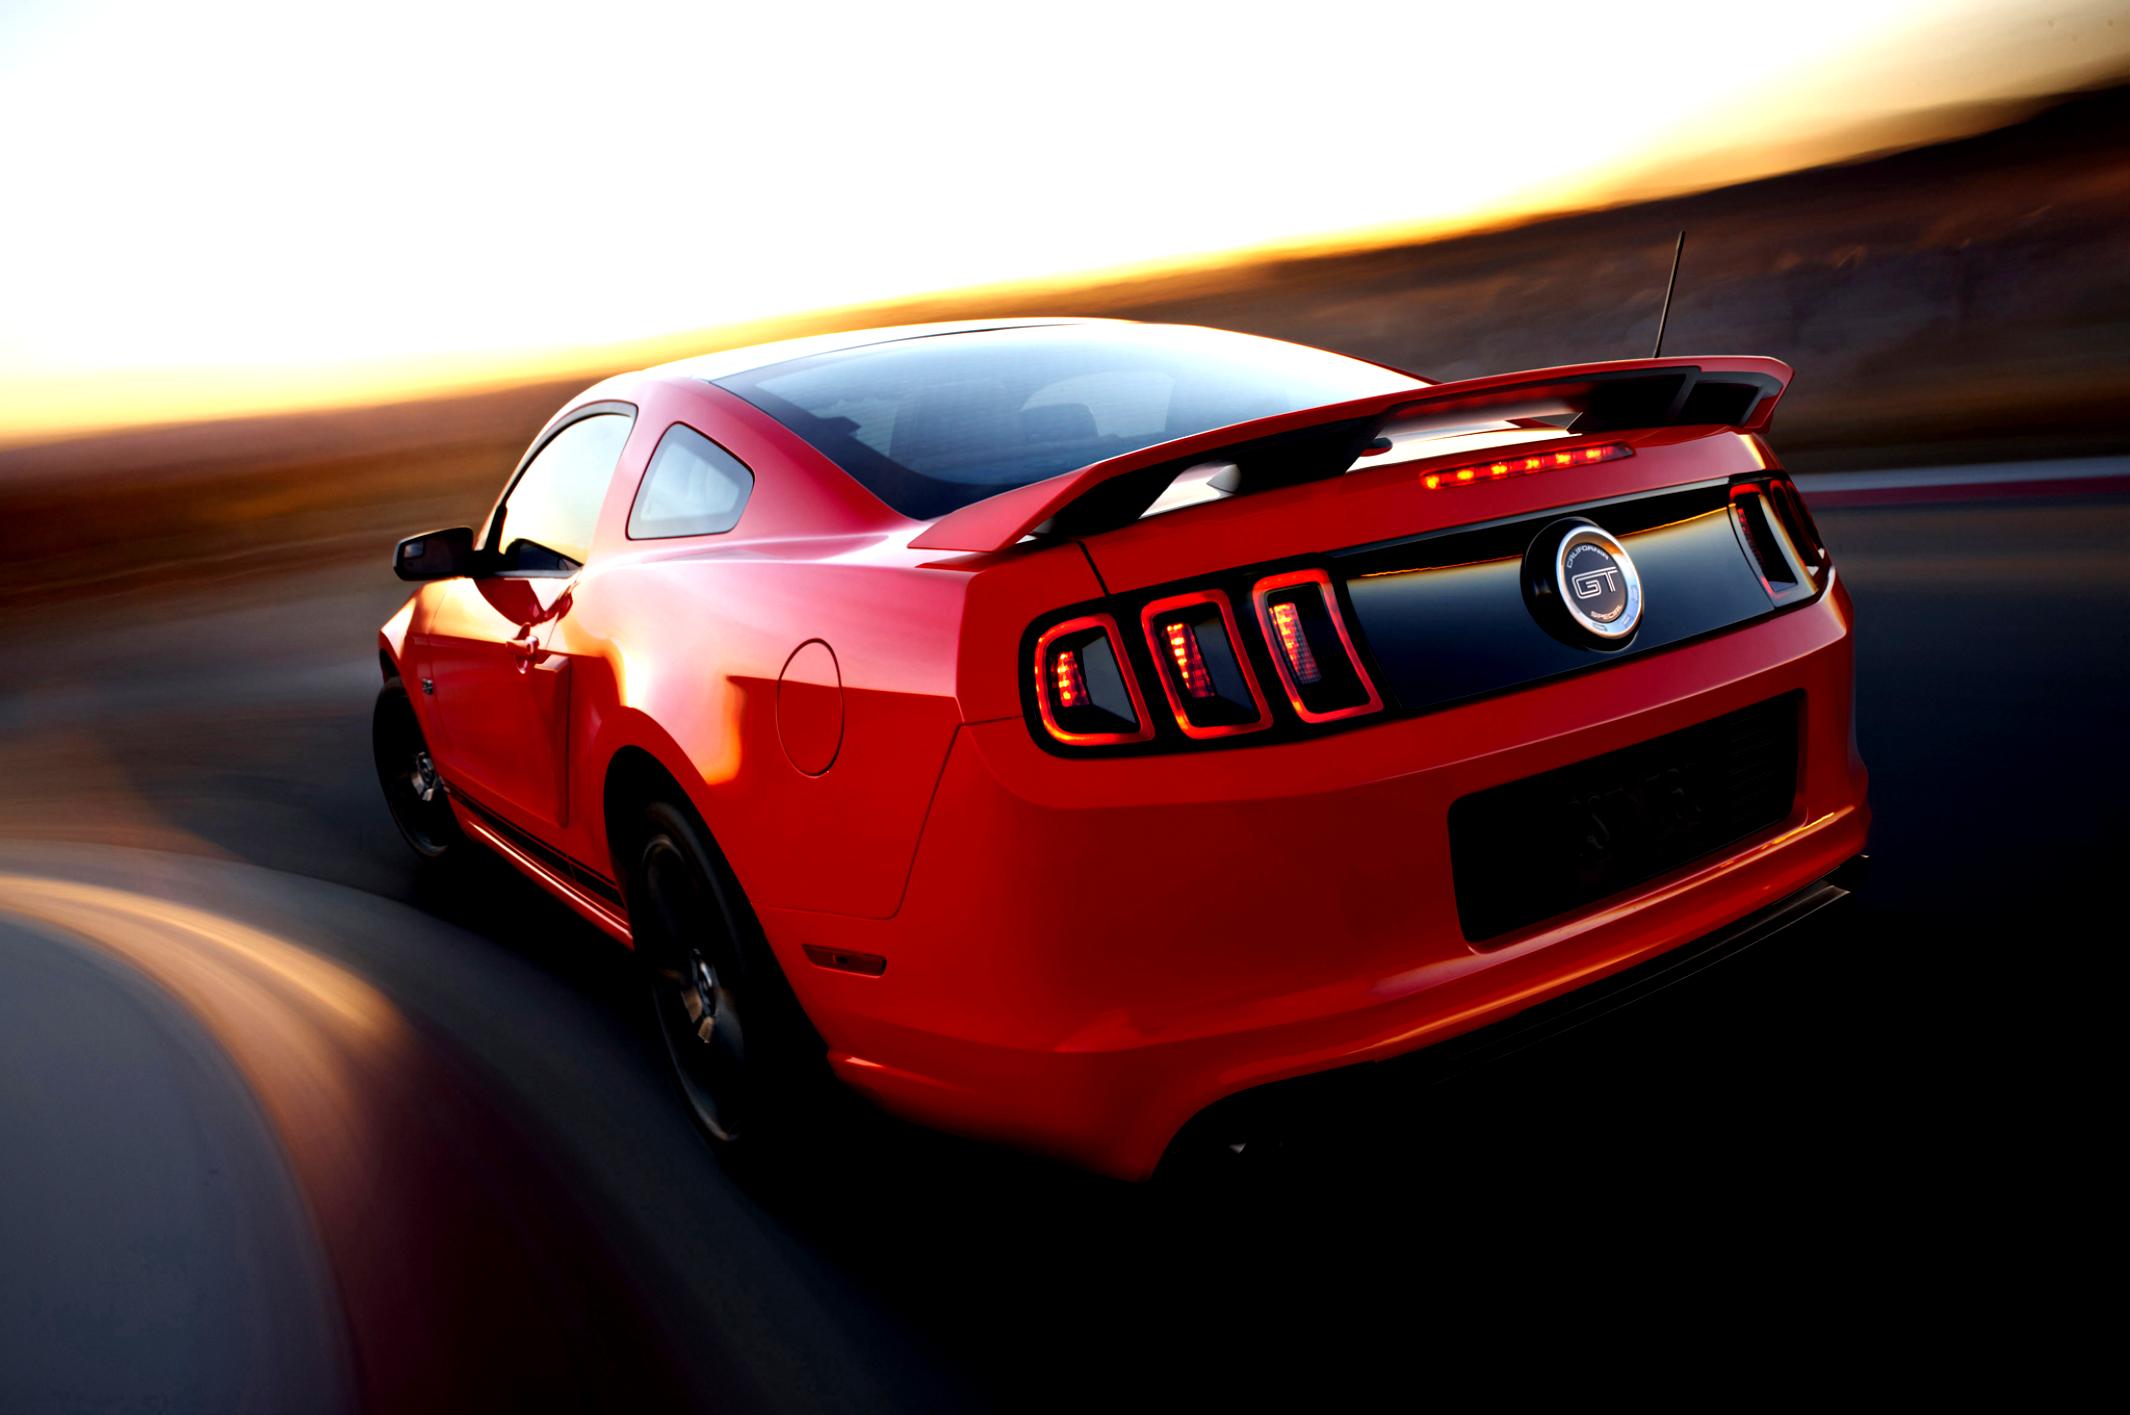 Ford Mustang 2014 #163